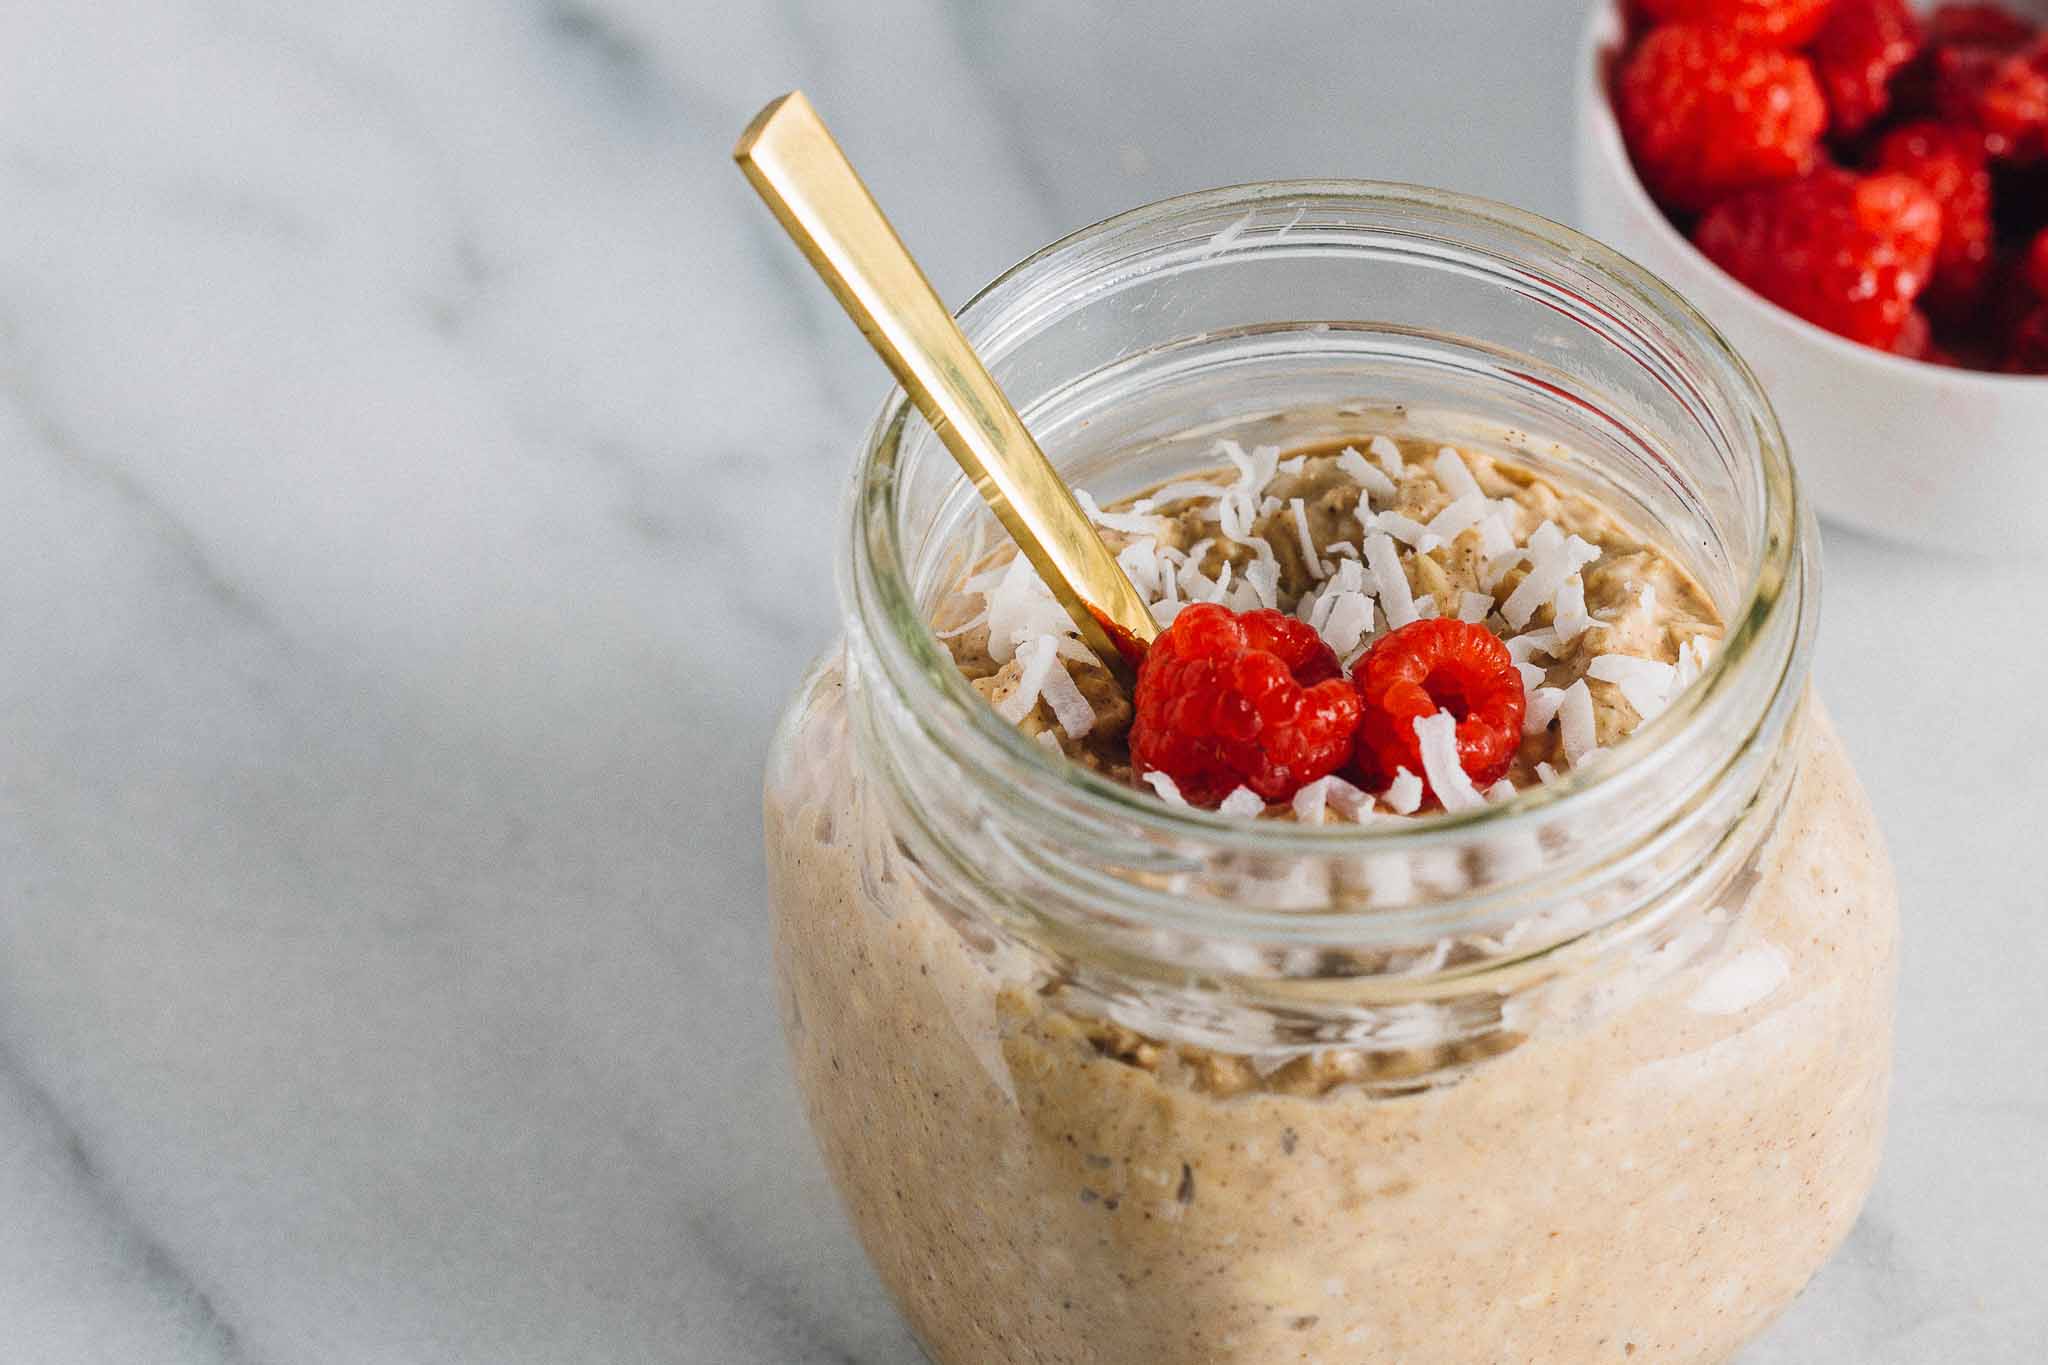 Chocolate Overnight Oats: Start your day with a high-protein breakfast that will keep you full, focused and ready to seize the day!